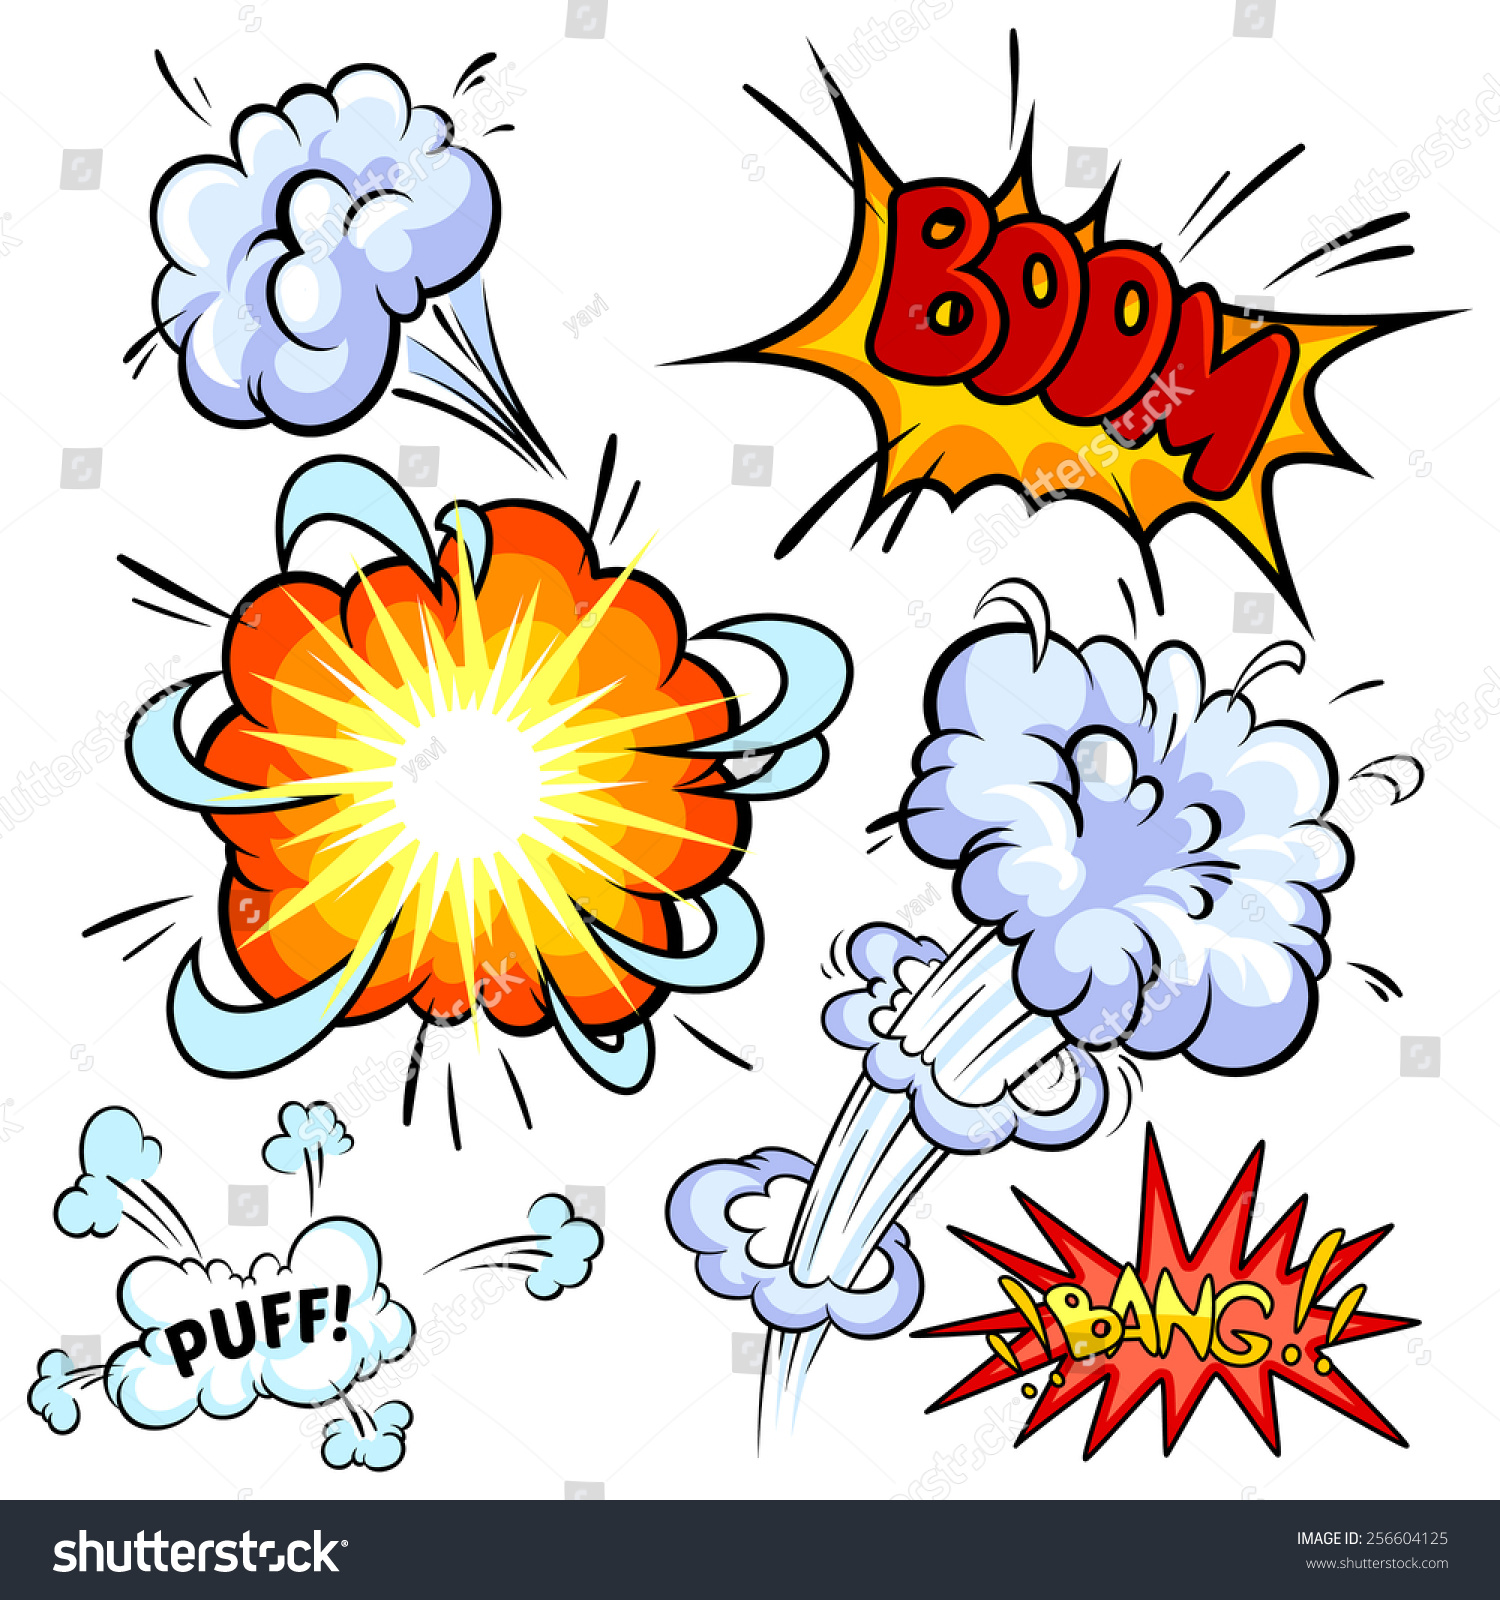 Set Of Comic Explosion. Vector Clip-Art Illustration On A White ...